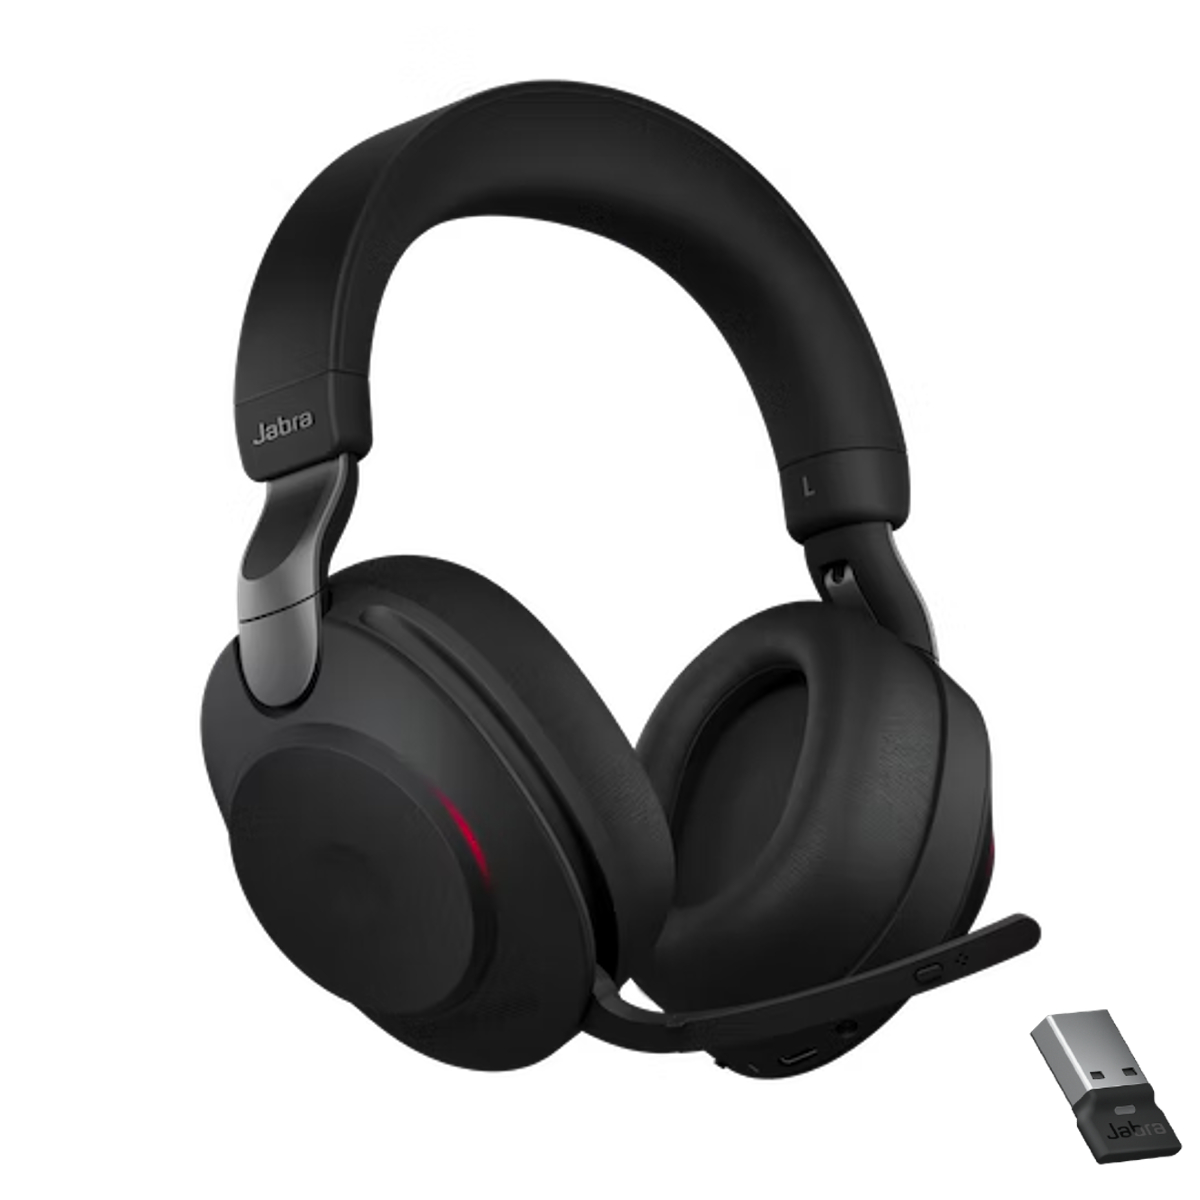 USB-A 380A UC Macondo Link Jabra With | Networks Evolve2 85 | Bluetooth Headset |Black Stereo (28599-989-999) Adapter